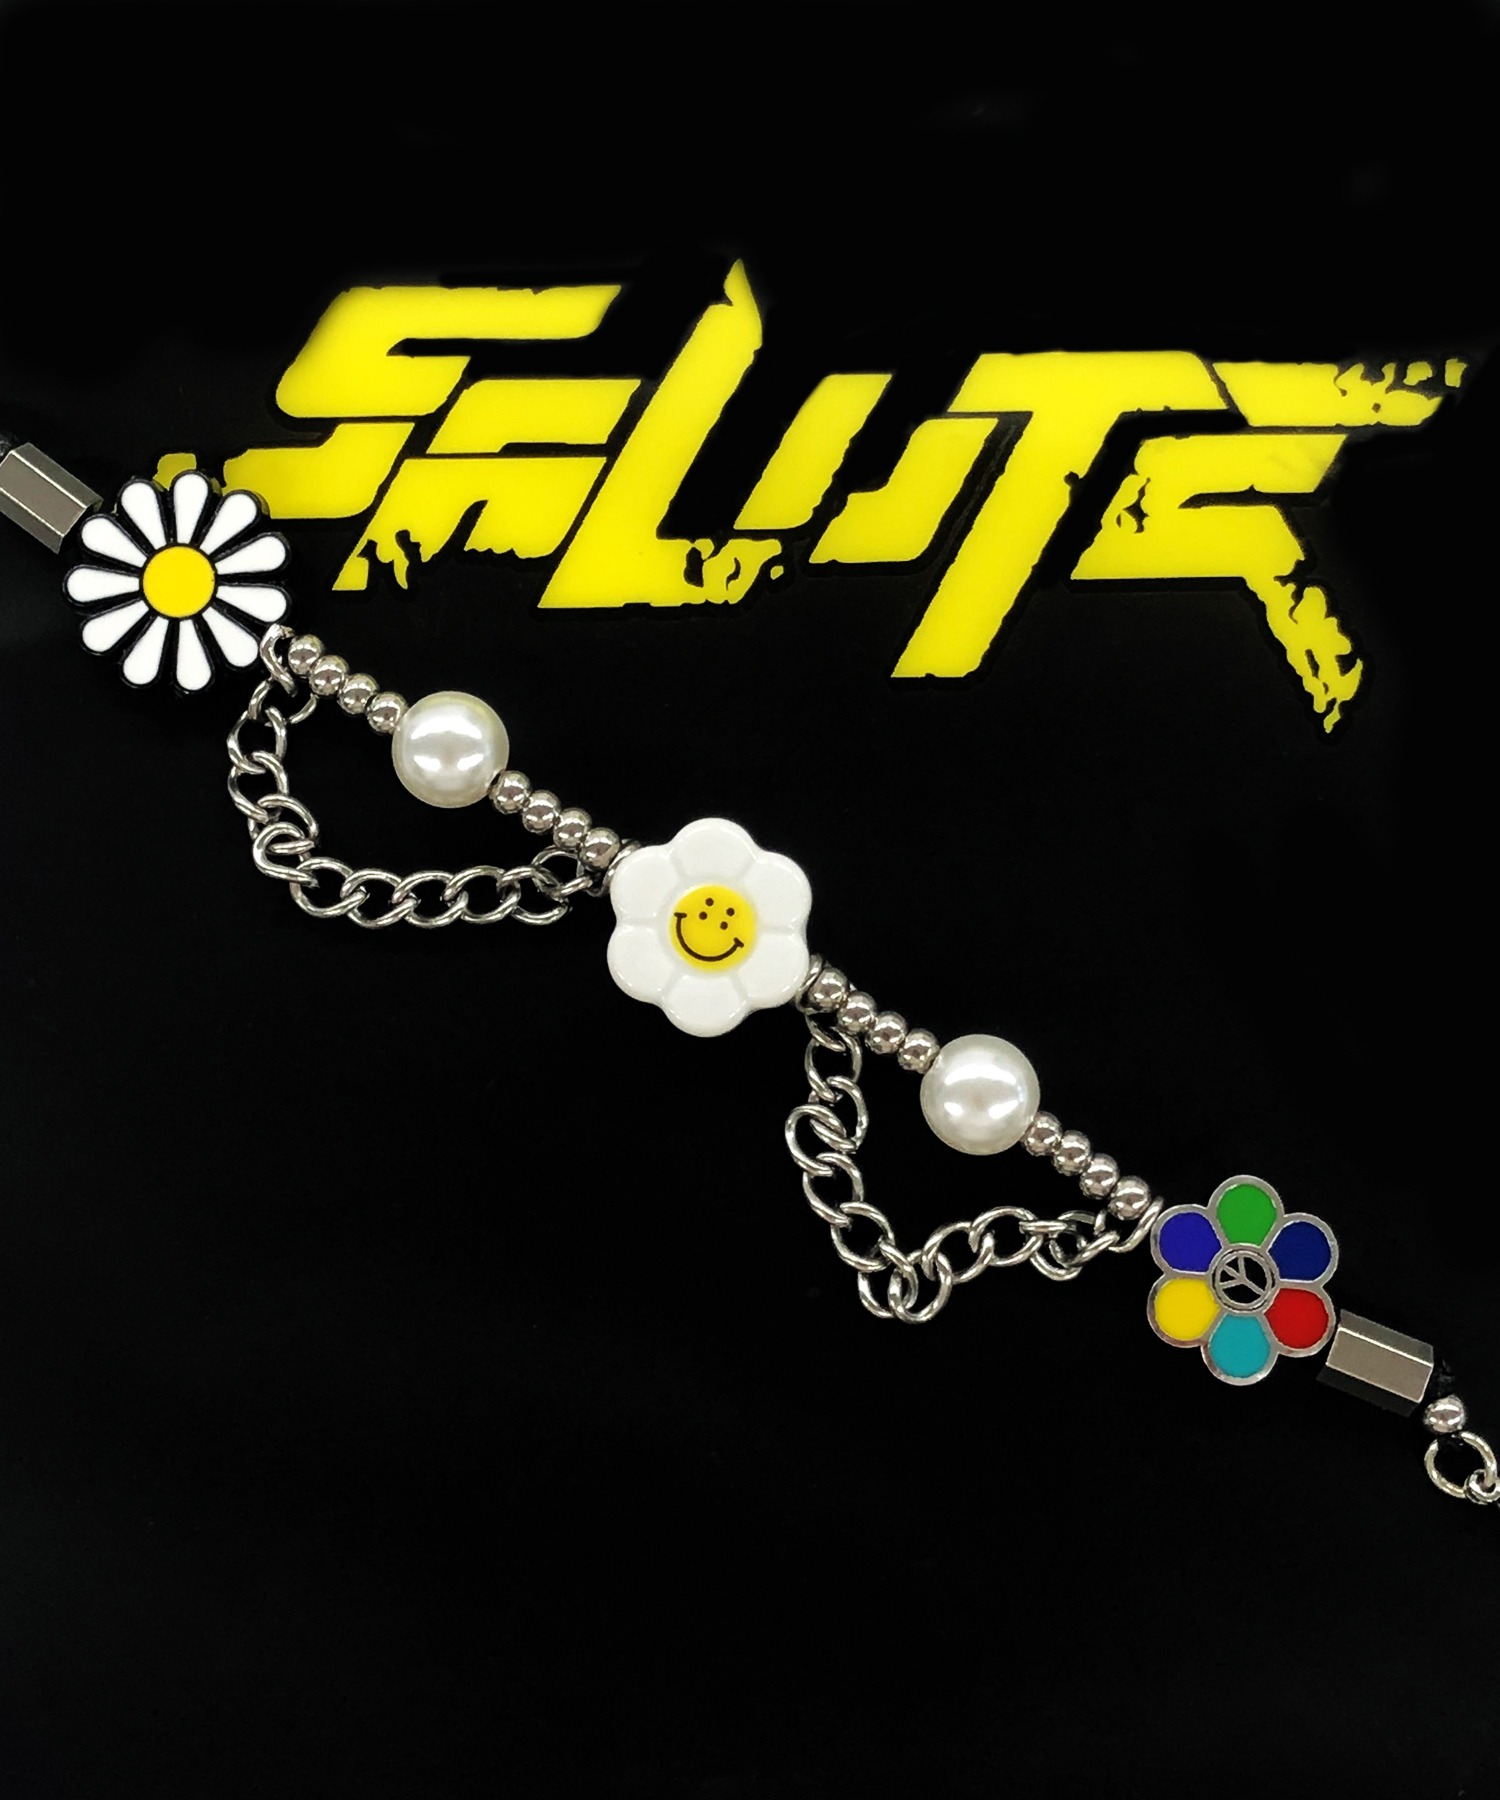 SALUTE/サルーテ』 FLOWER ANARCHY PEARL CHARMS BRACELET by SALUTE